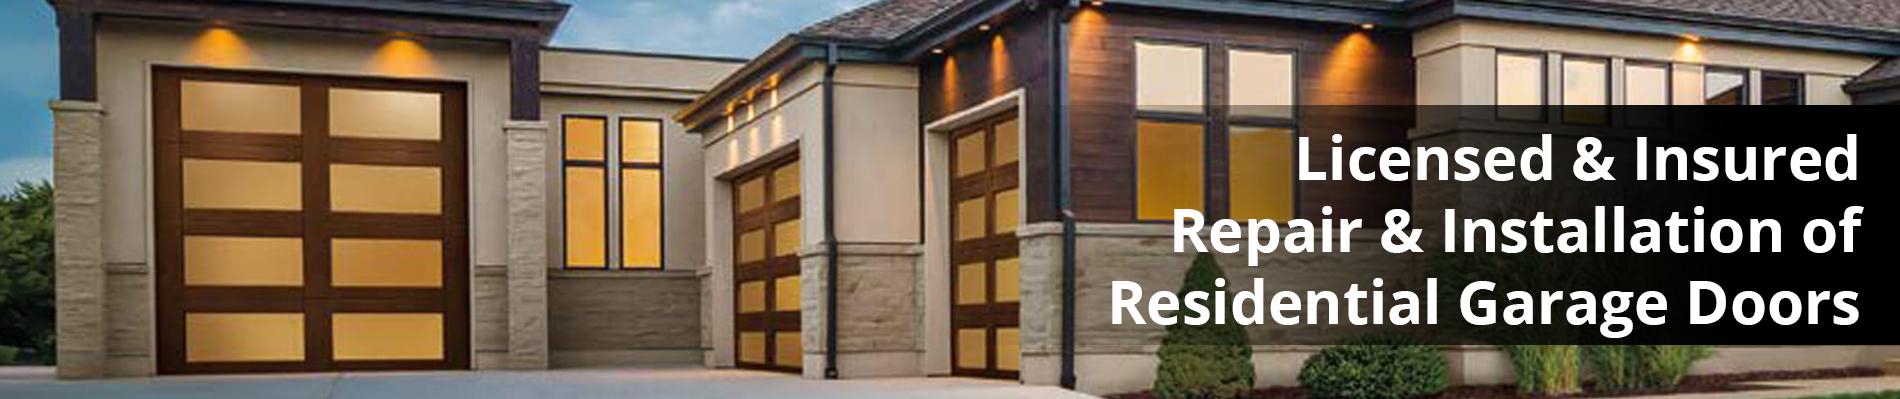 Licensed and Insured Repair and Installation of Residential Garage Doors